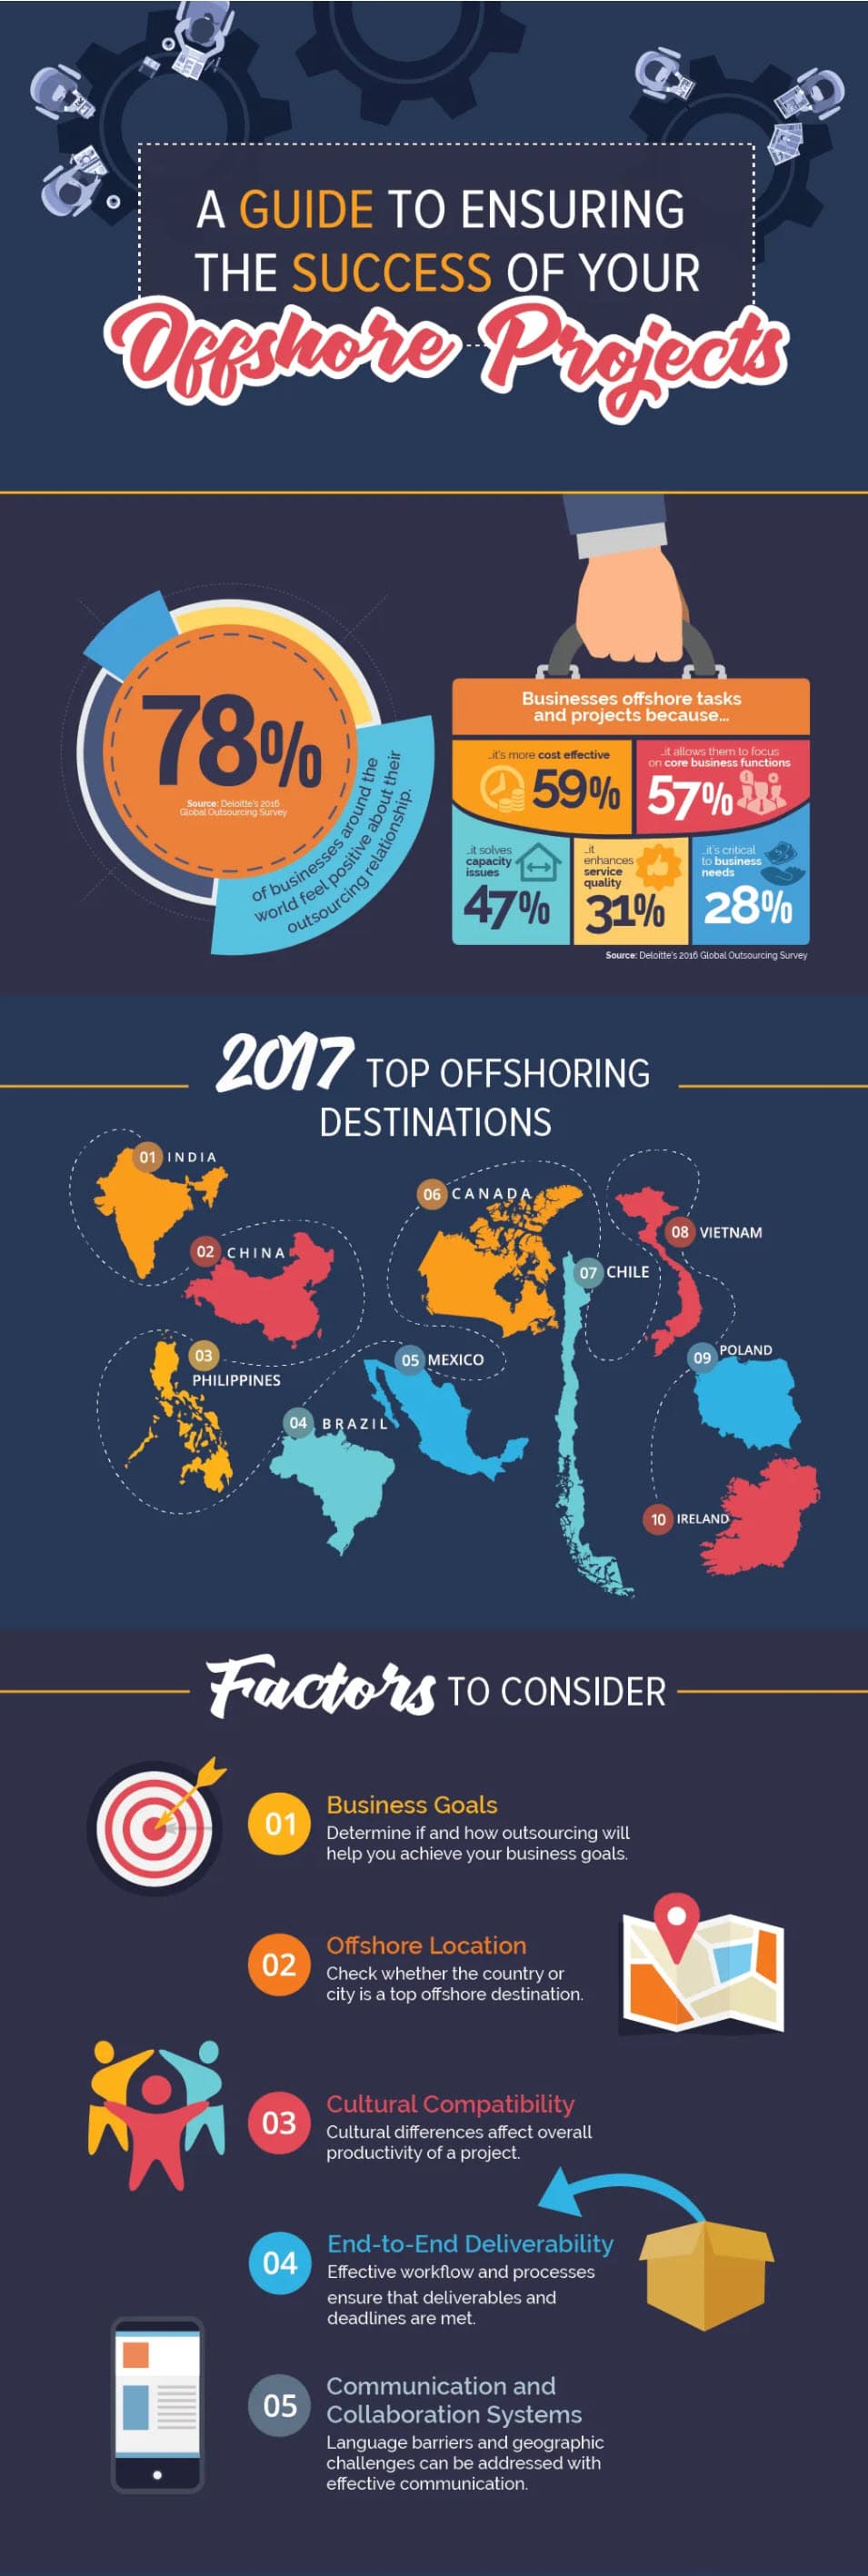 26-11
A GUIDE TO ENSURING
THE SUCCESS OF YOUR
Offshore Projects
78%
Source: Deloitte's 2016
Global Outsourcing Survey
01 INDIA
of businesses arou
orld feel positiv
outso
03
02 CHINA
PHILIPPINES
04 BRAZIL
01
rcing relationship.
03
it solves
capacity
issues
2017 TOP OFFSHORING
DESTINATIONS
04
Businesses offshore tasks
and projects because...
it's more cost effective
05 MEXICO
59% 57%
it
enhances
service
quality
47% 31% 28%
06 CANADA
07 CHILE
Factors TO CONSIDER
Offshore Location
02 Check whether the country or
city is a top offshore destination.
Business Goals
Determine if and how outsourcing will
help you achieve your business goals.
it allows them to focus
on core business functions
Cultural Compatibility
Cultural differences affect overall
productivity of a project.
Source: Deloitte's 2016 Global Outsourcing Survey
End-to-End Deliverability
Effective workflow and processes
ensure that deliverables and
deadlines are met.
Communication and
05 Collaboration Systems
Language barriers and geographic
challenges can be addressed with
effective communication.
it's critical
to business
needs
08 VIETNAM
09
POLAND
10 IRELAND